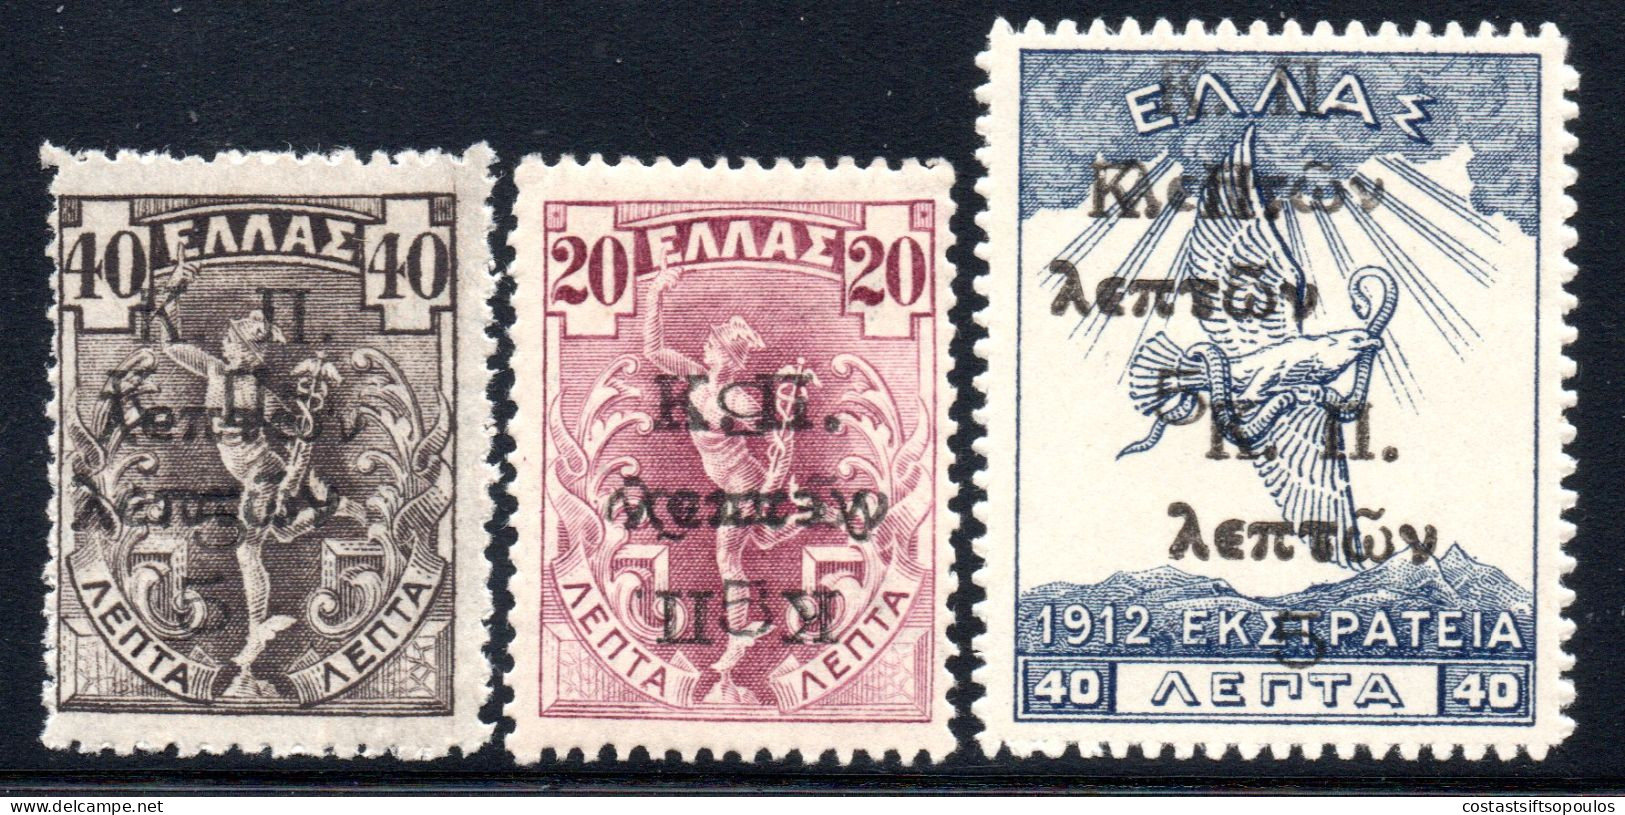 2702. GREECE 1917 3 CHARITY ST. LOT DOUBLE SURCHARGE MH - Charity Issues